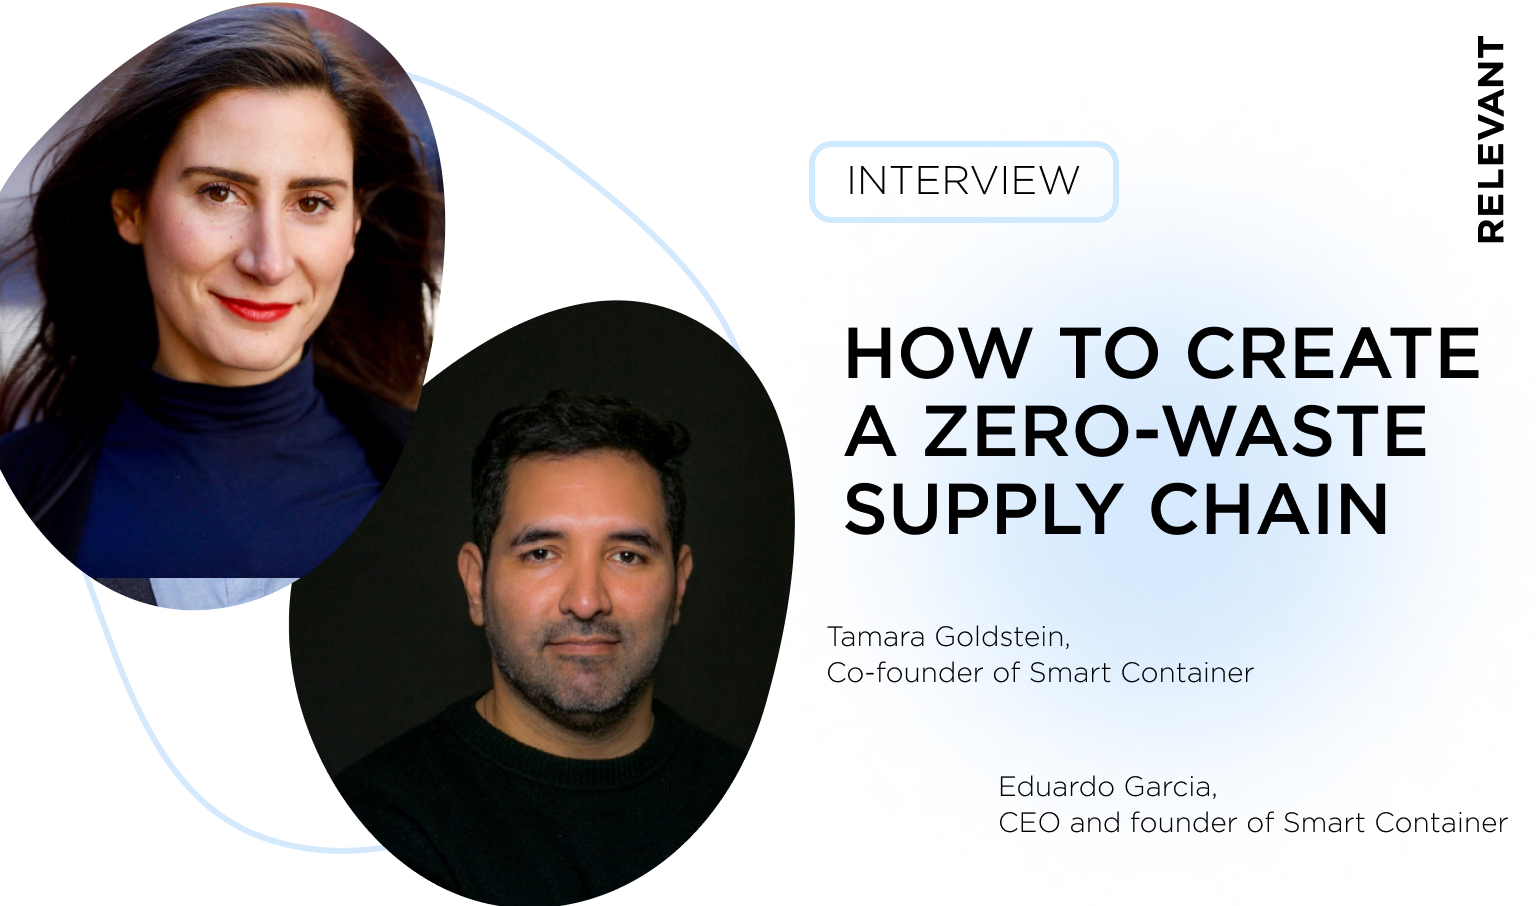 How to Create a Zero-Waste Supply Chain With AI-driven Platform and First-to-market IoT Devices